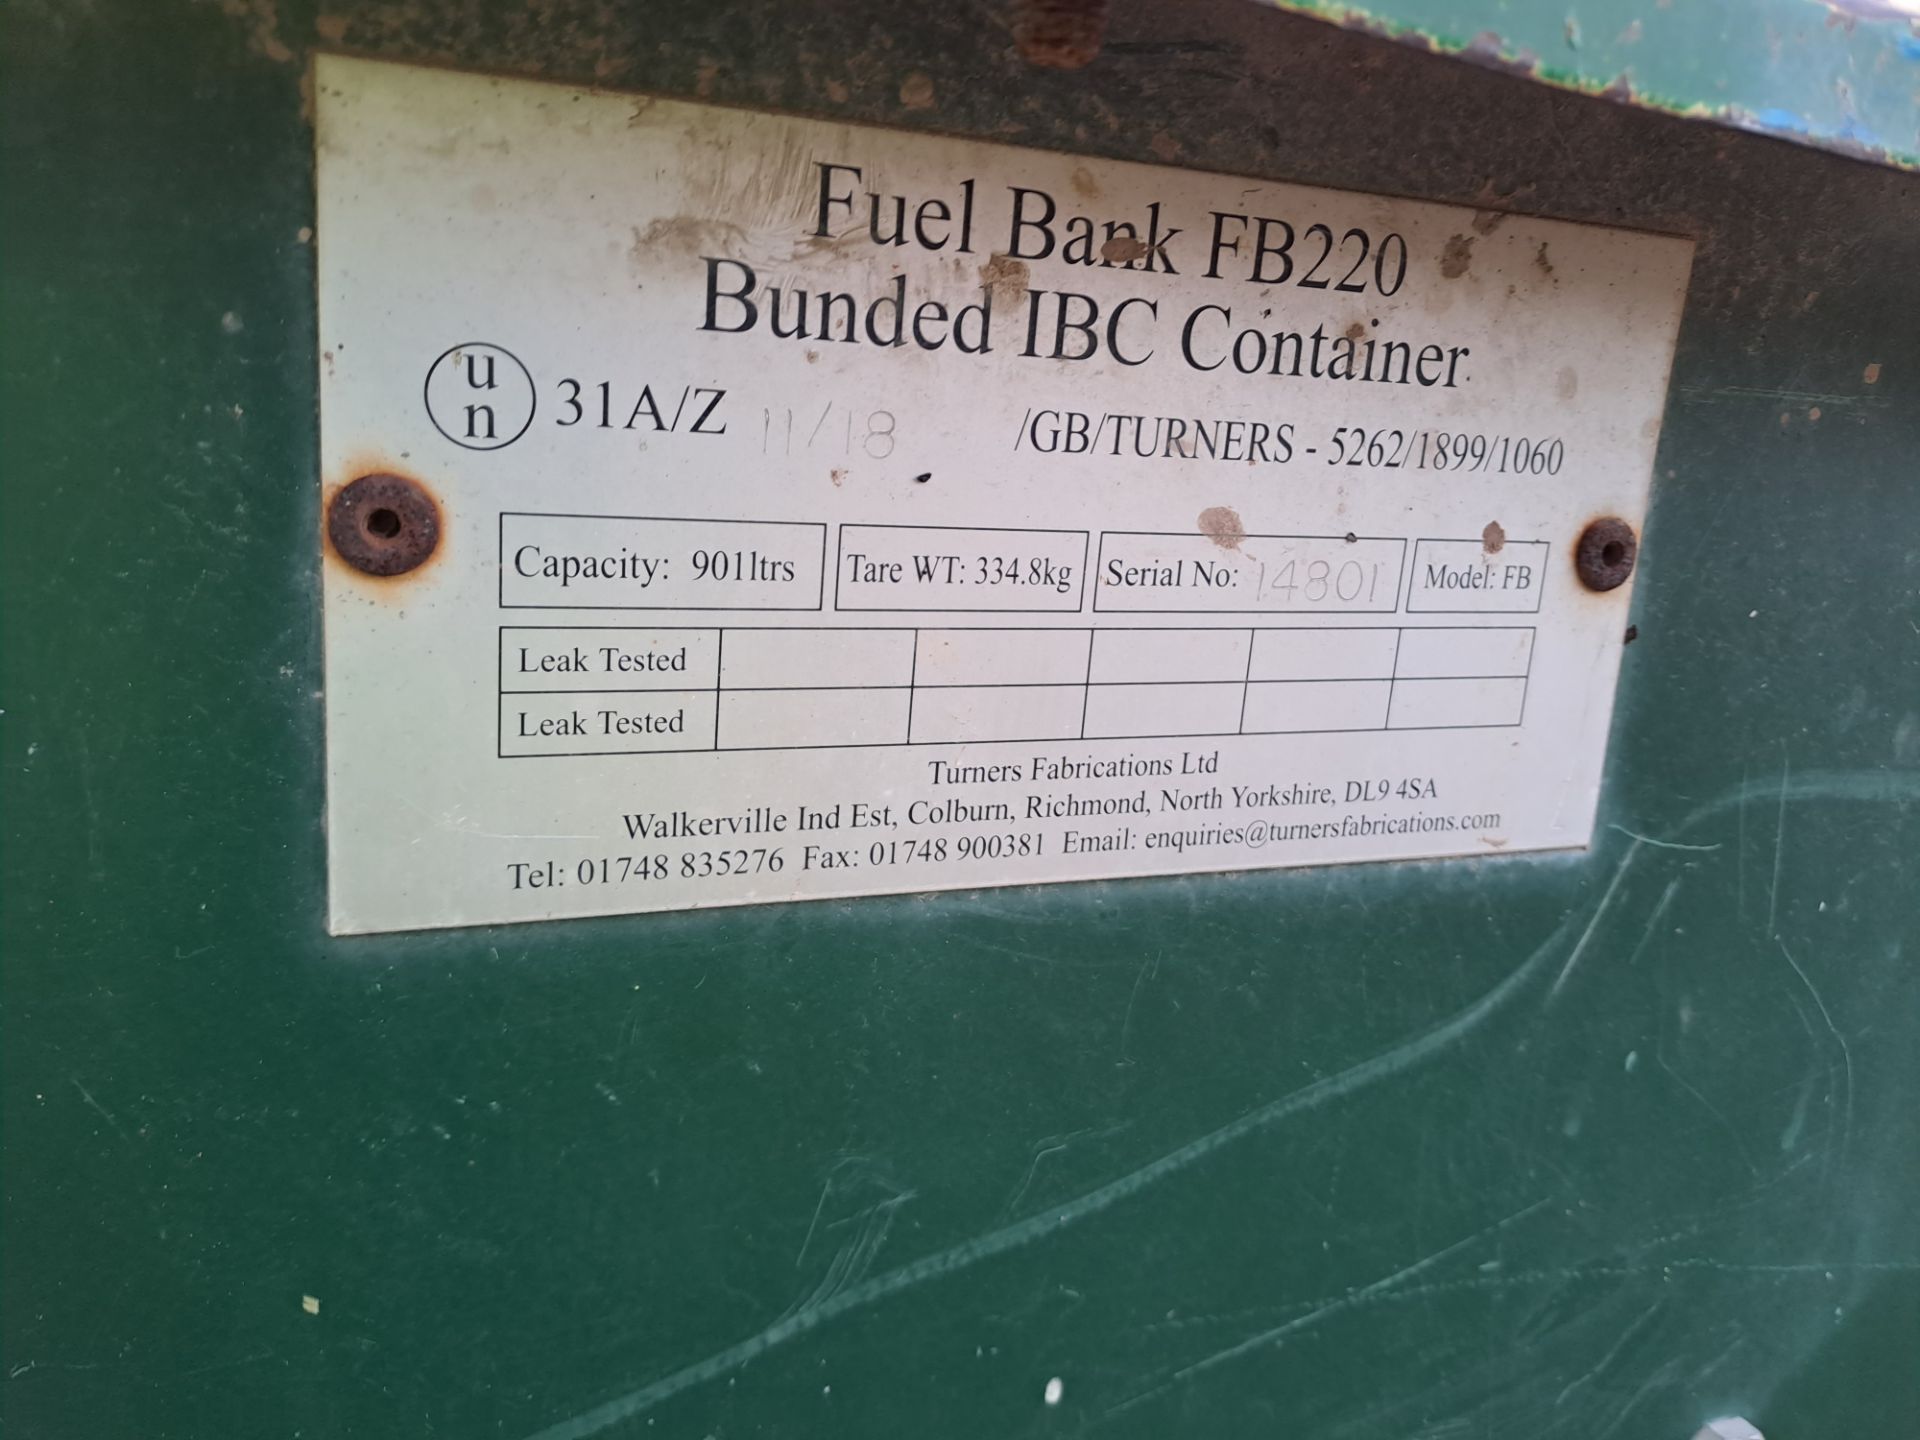 Fuel Bank FB220 bunded IBC skid mounted container, serial no. 14801, capacity 901 ltrs, with - Image 2 of 5